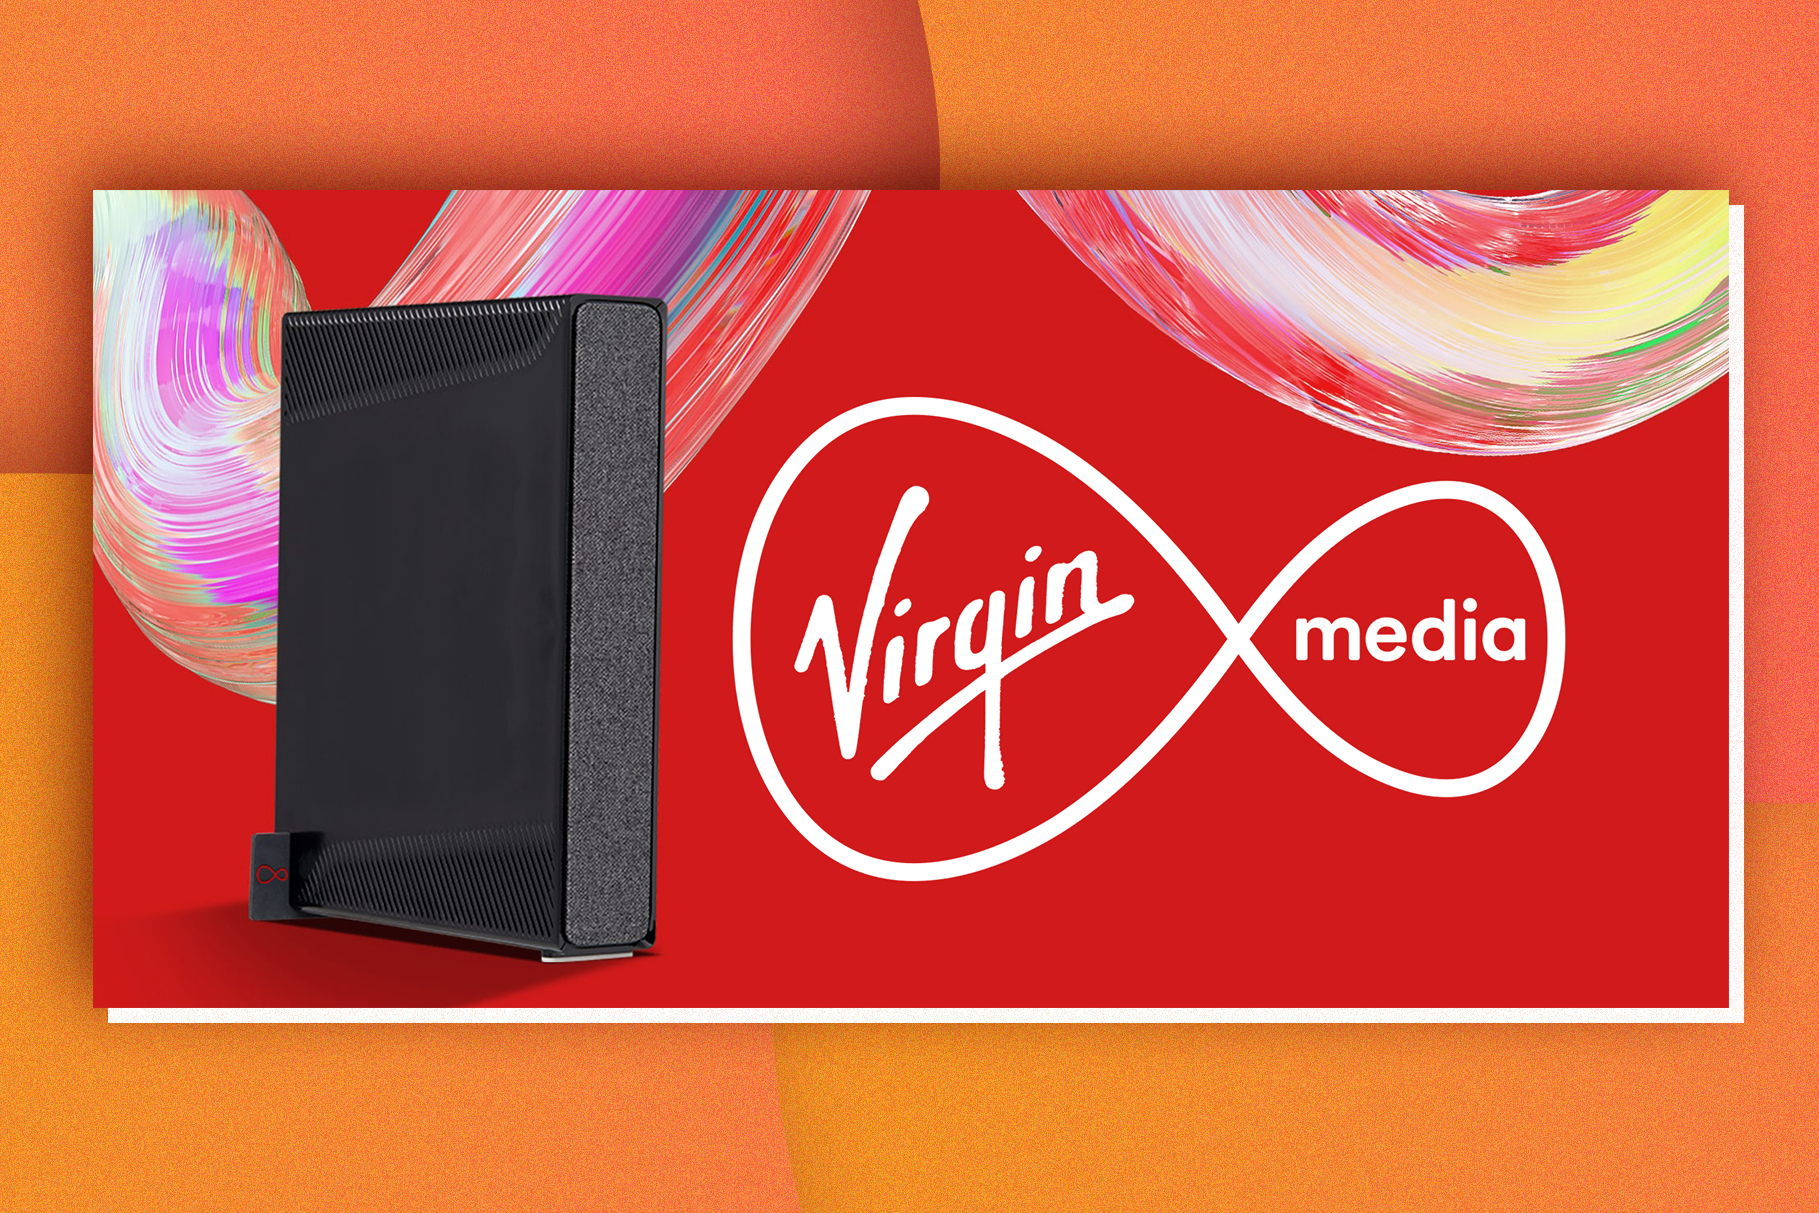 Virgin Media is offering speeds of up to 500 megabits per second for £35 per month